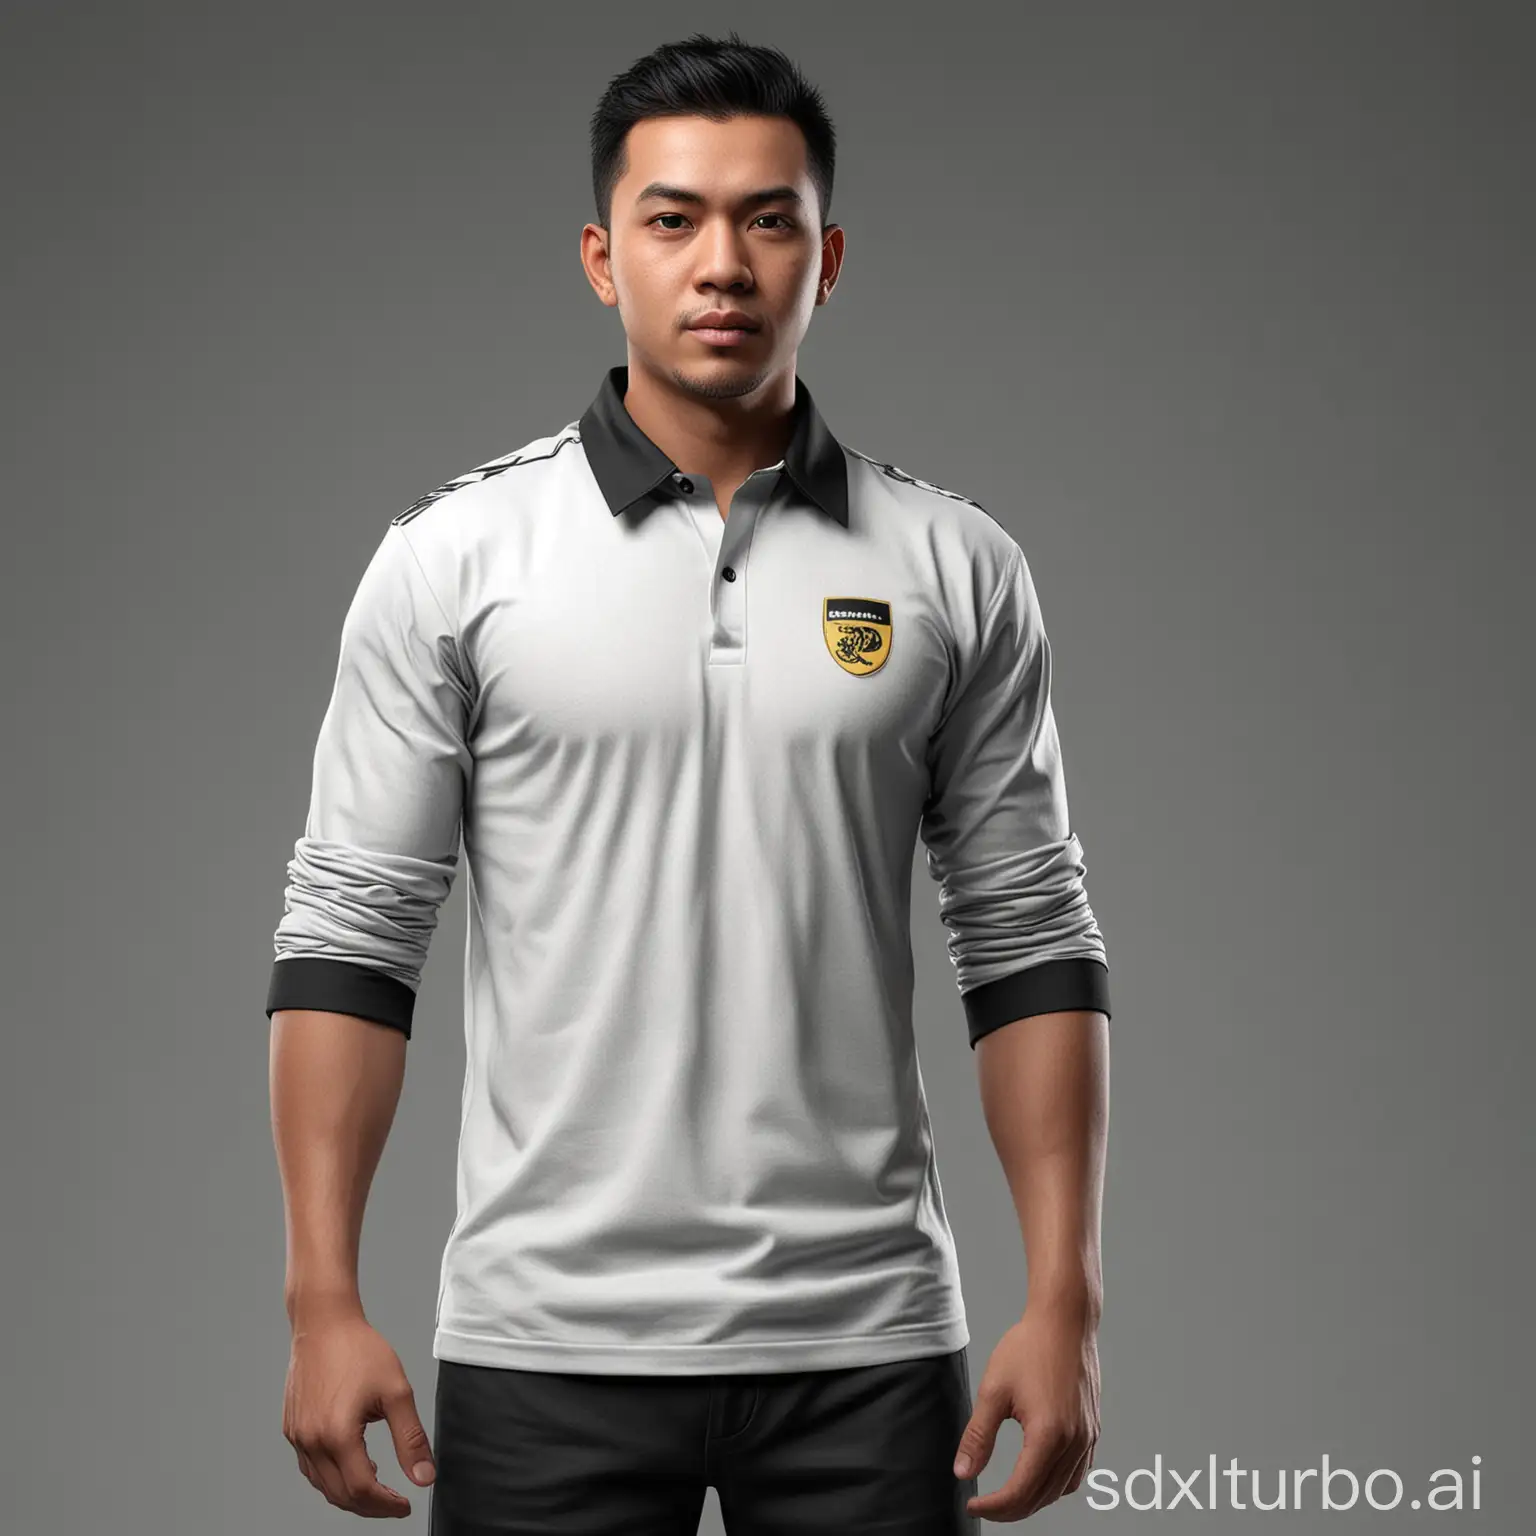 [Create a character 3D animation realistic full body with a big heads. A 35 year old Indonesian man. Tall, ideal body, buzzcut hair style, beautiful and neat eyebrows, beautiful eyes, sharp nose, beautiful lips, faint smile. Stand at an angle, eyes straight facing the camera. Wearing a sports jersey which is predominantly white with yellow accents on the sleeve and black on the edge and collar of the shirt. Soft gray gradient color background. Very realistic image, 3D, UHD, 16K, good and natural lighting].